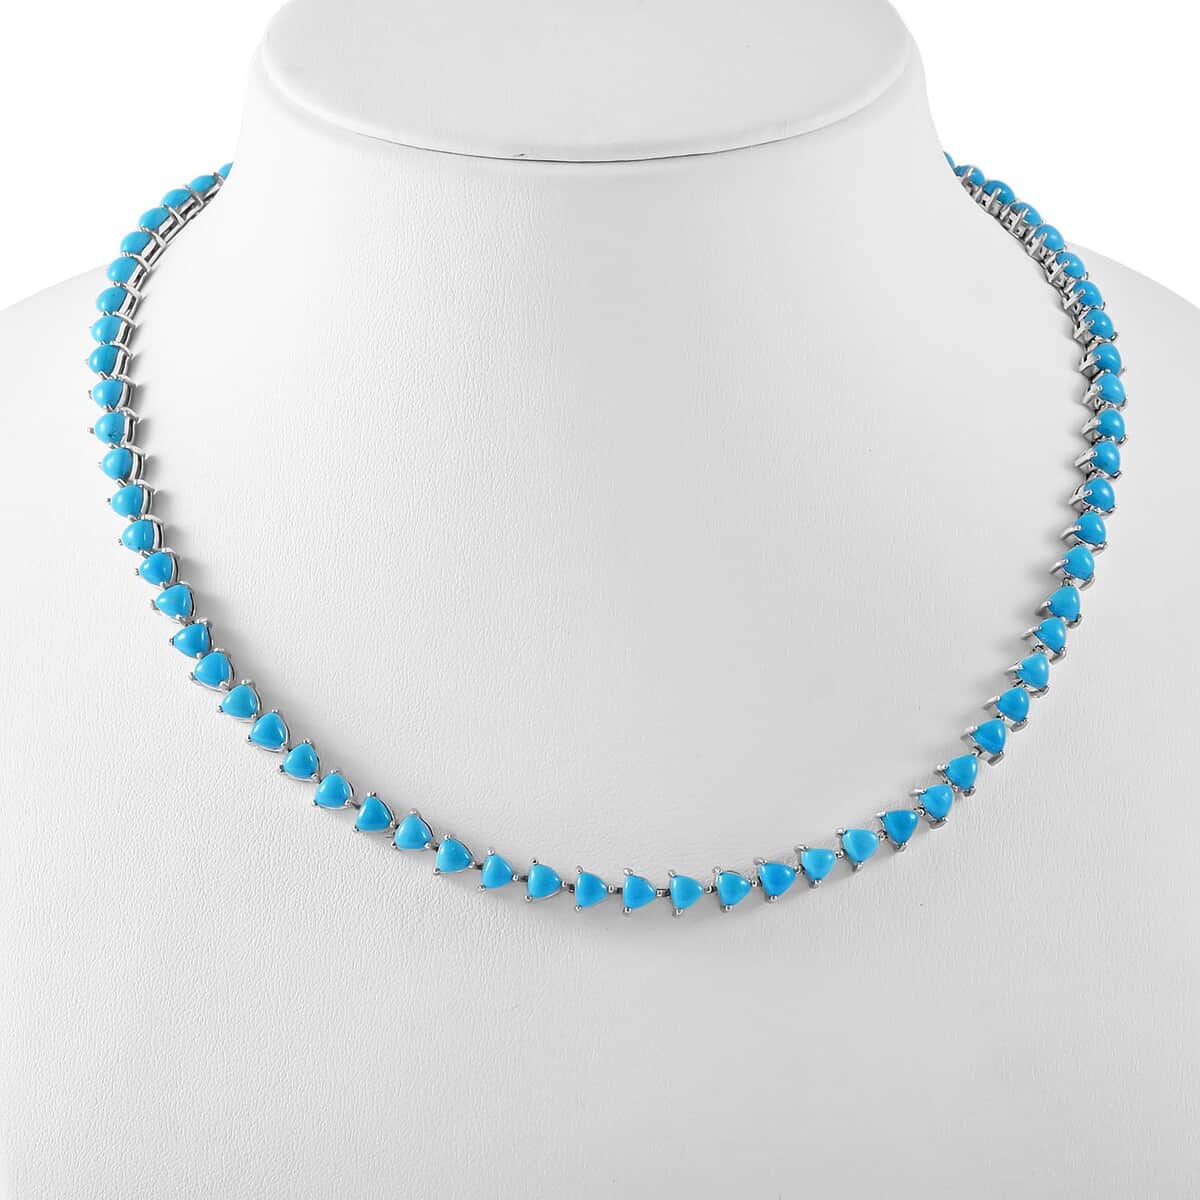 Premium Sleeping Beauty Turquoise Tennis Necklace 18 Inches in Platinum Over Sterling Silver 32.50 ctw (Del. in 5-7 Days) image number 1